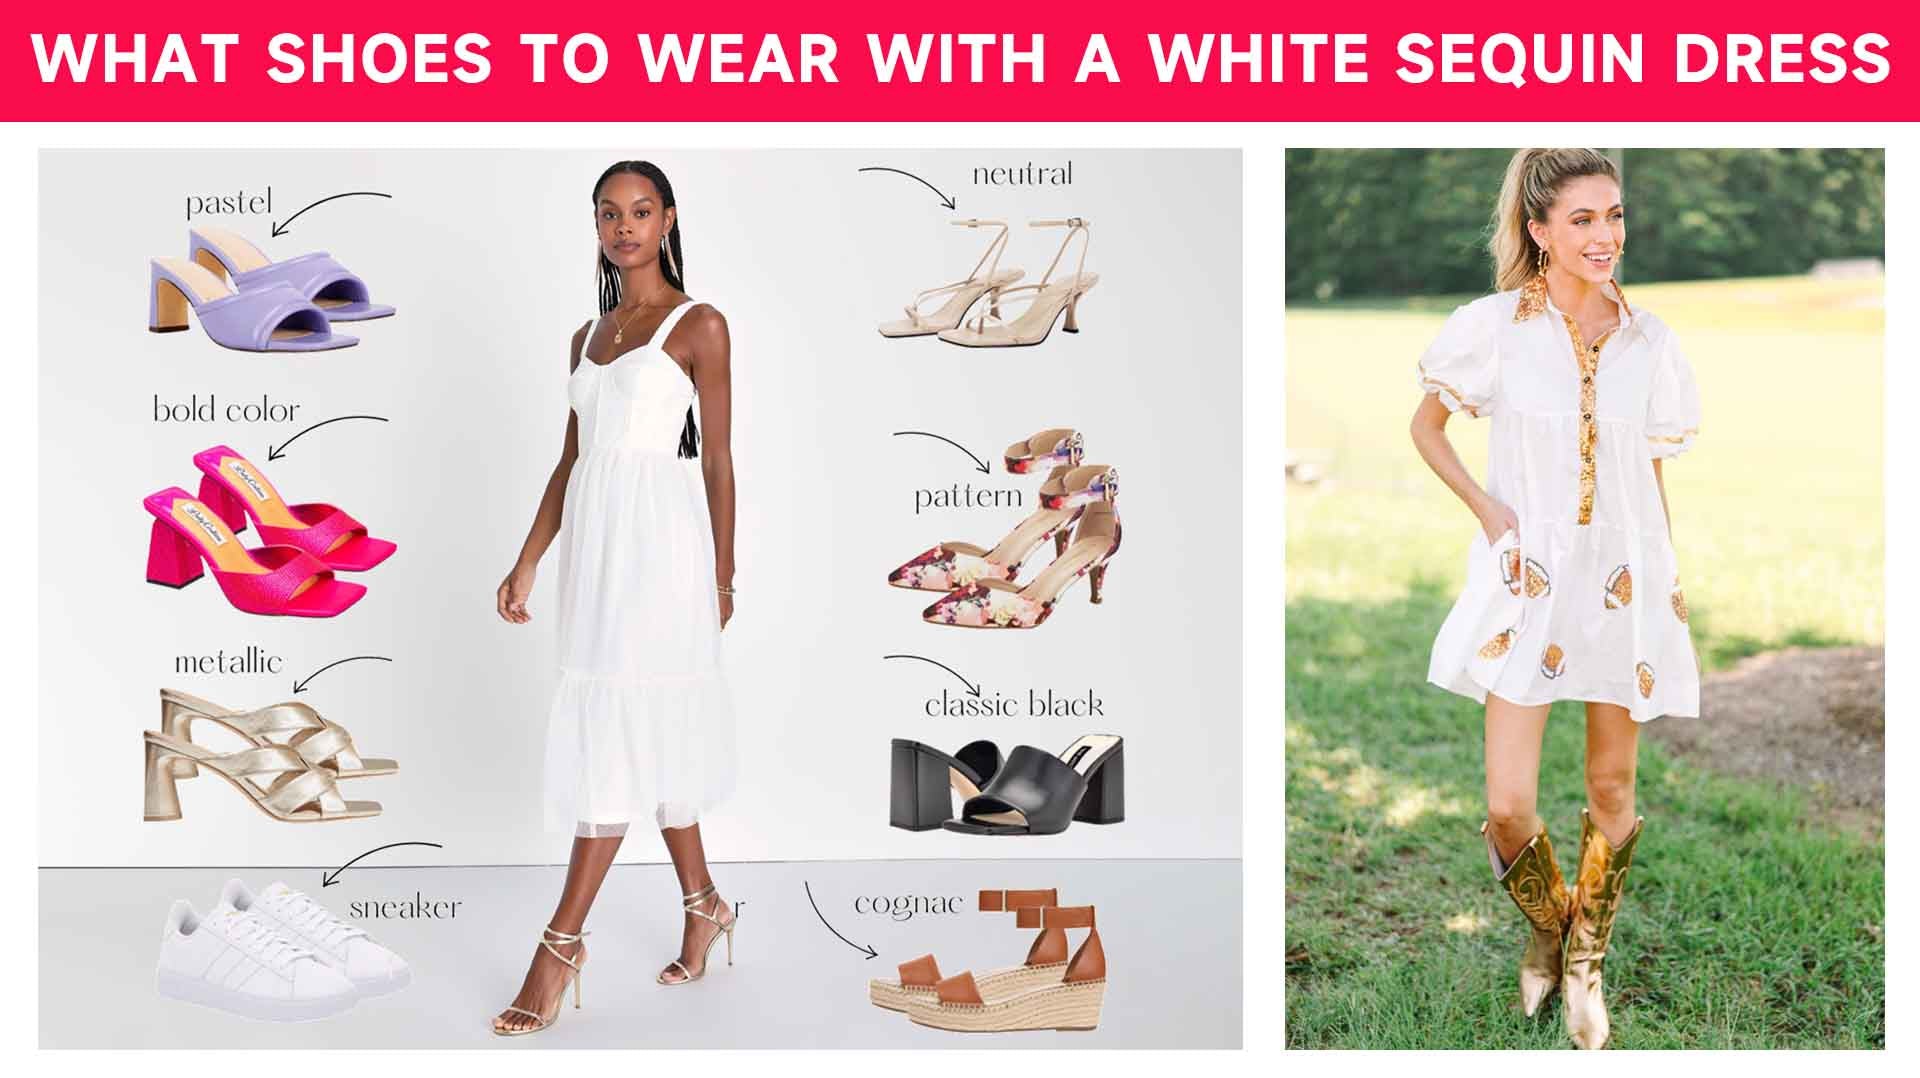 WHAT SHOES TO WEAR WITH A WHITE SEQUIN DRESS